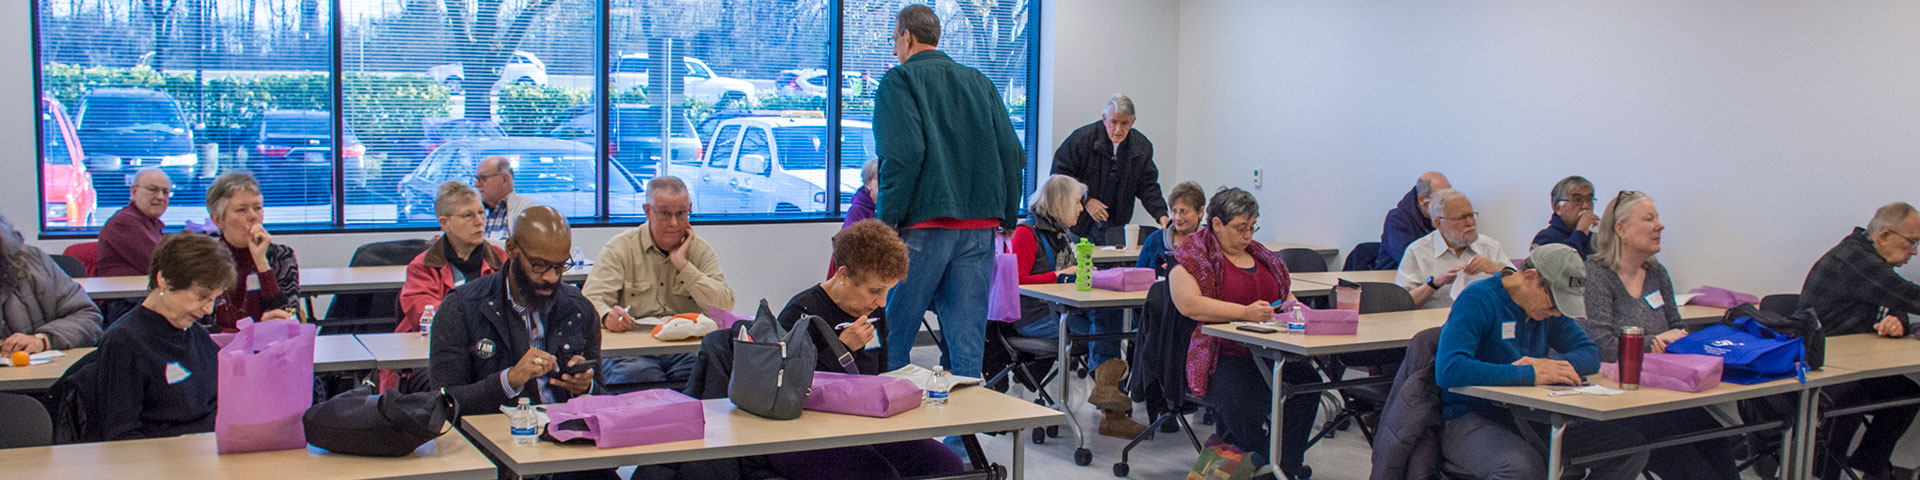 Lifelong Learning classes for age 50+ learners at Montgomery College, Maryland